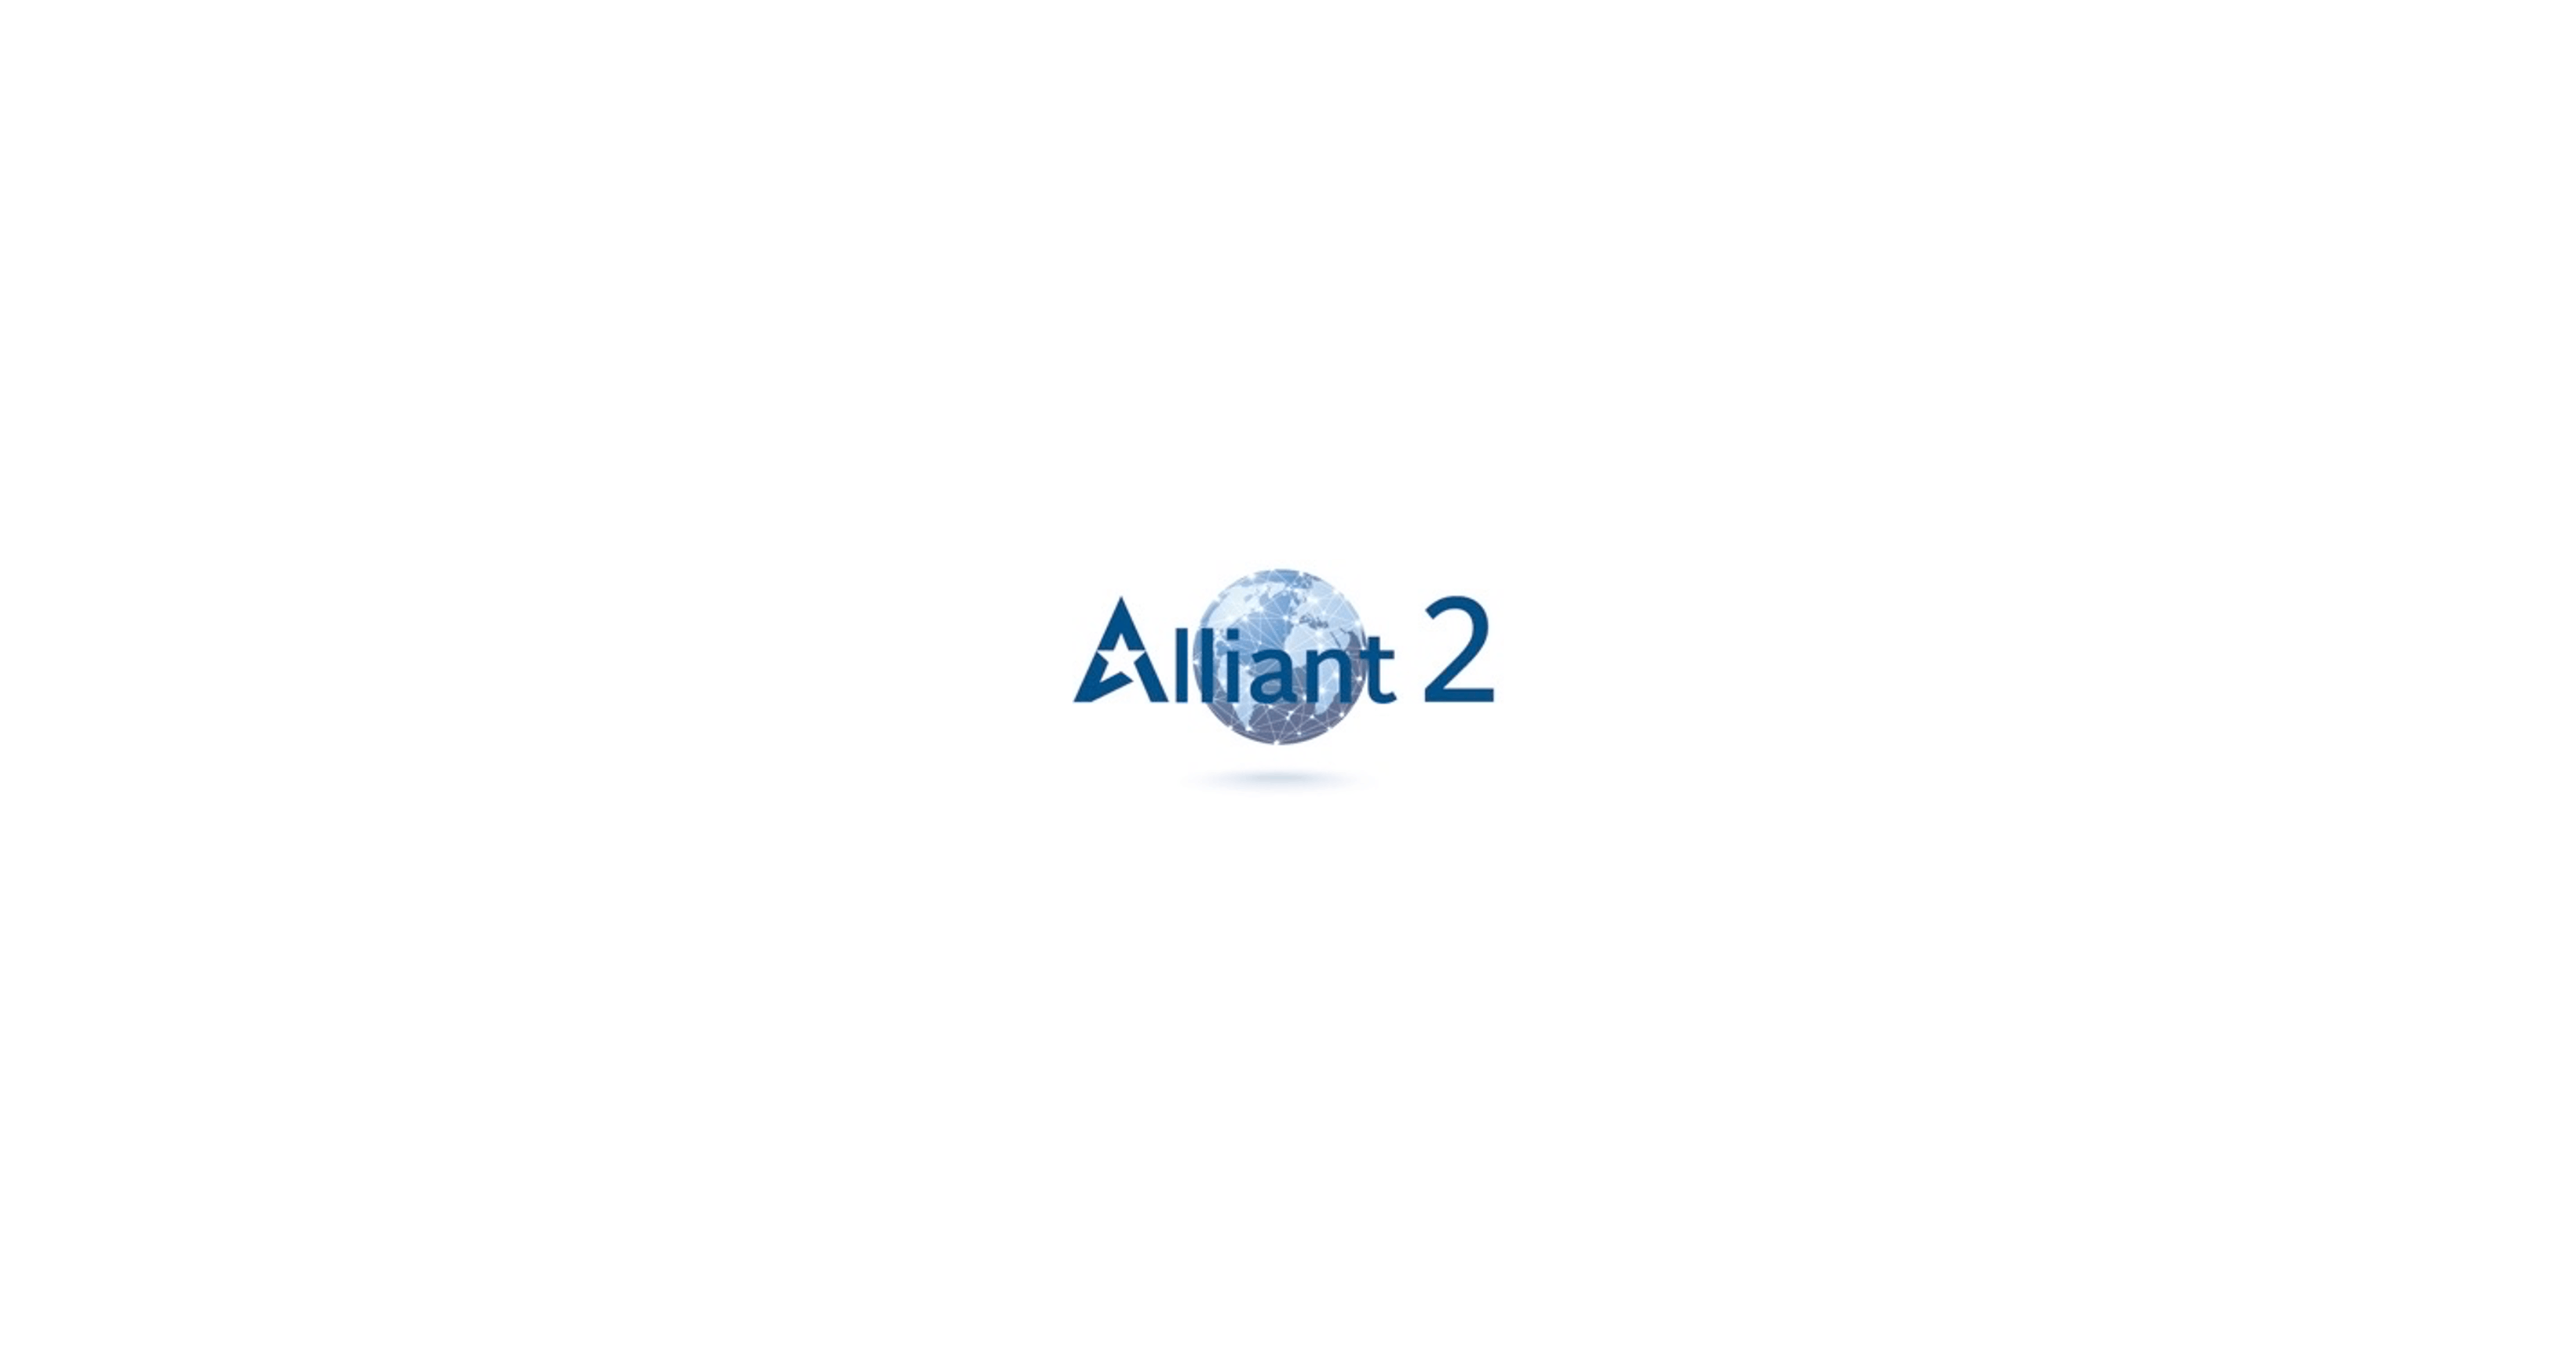 Alliant 2 logo. Related to: Alliant 2, GSA GWAC, Alliant GWAC, integrated IT solution, National Security Systems, FAR 39.002.